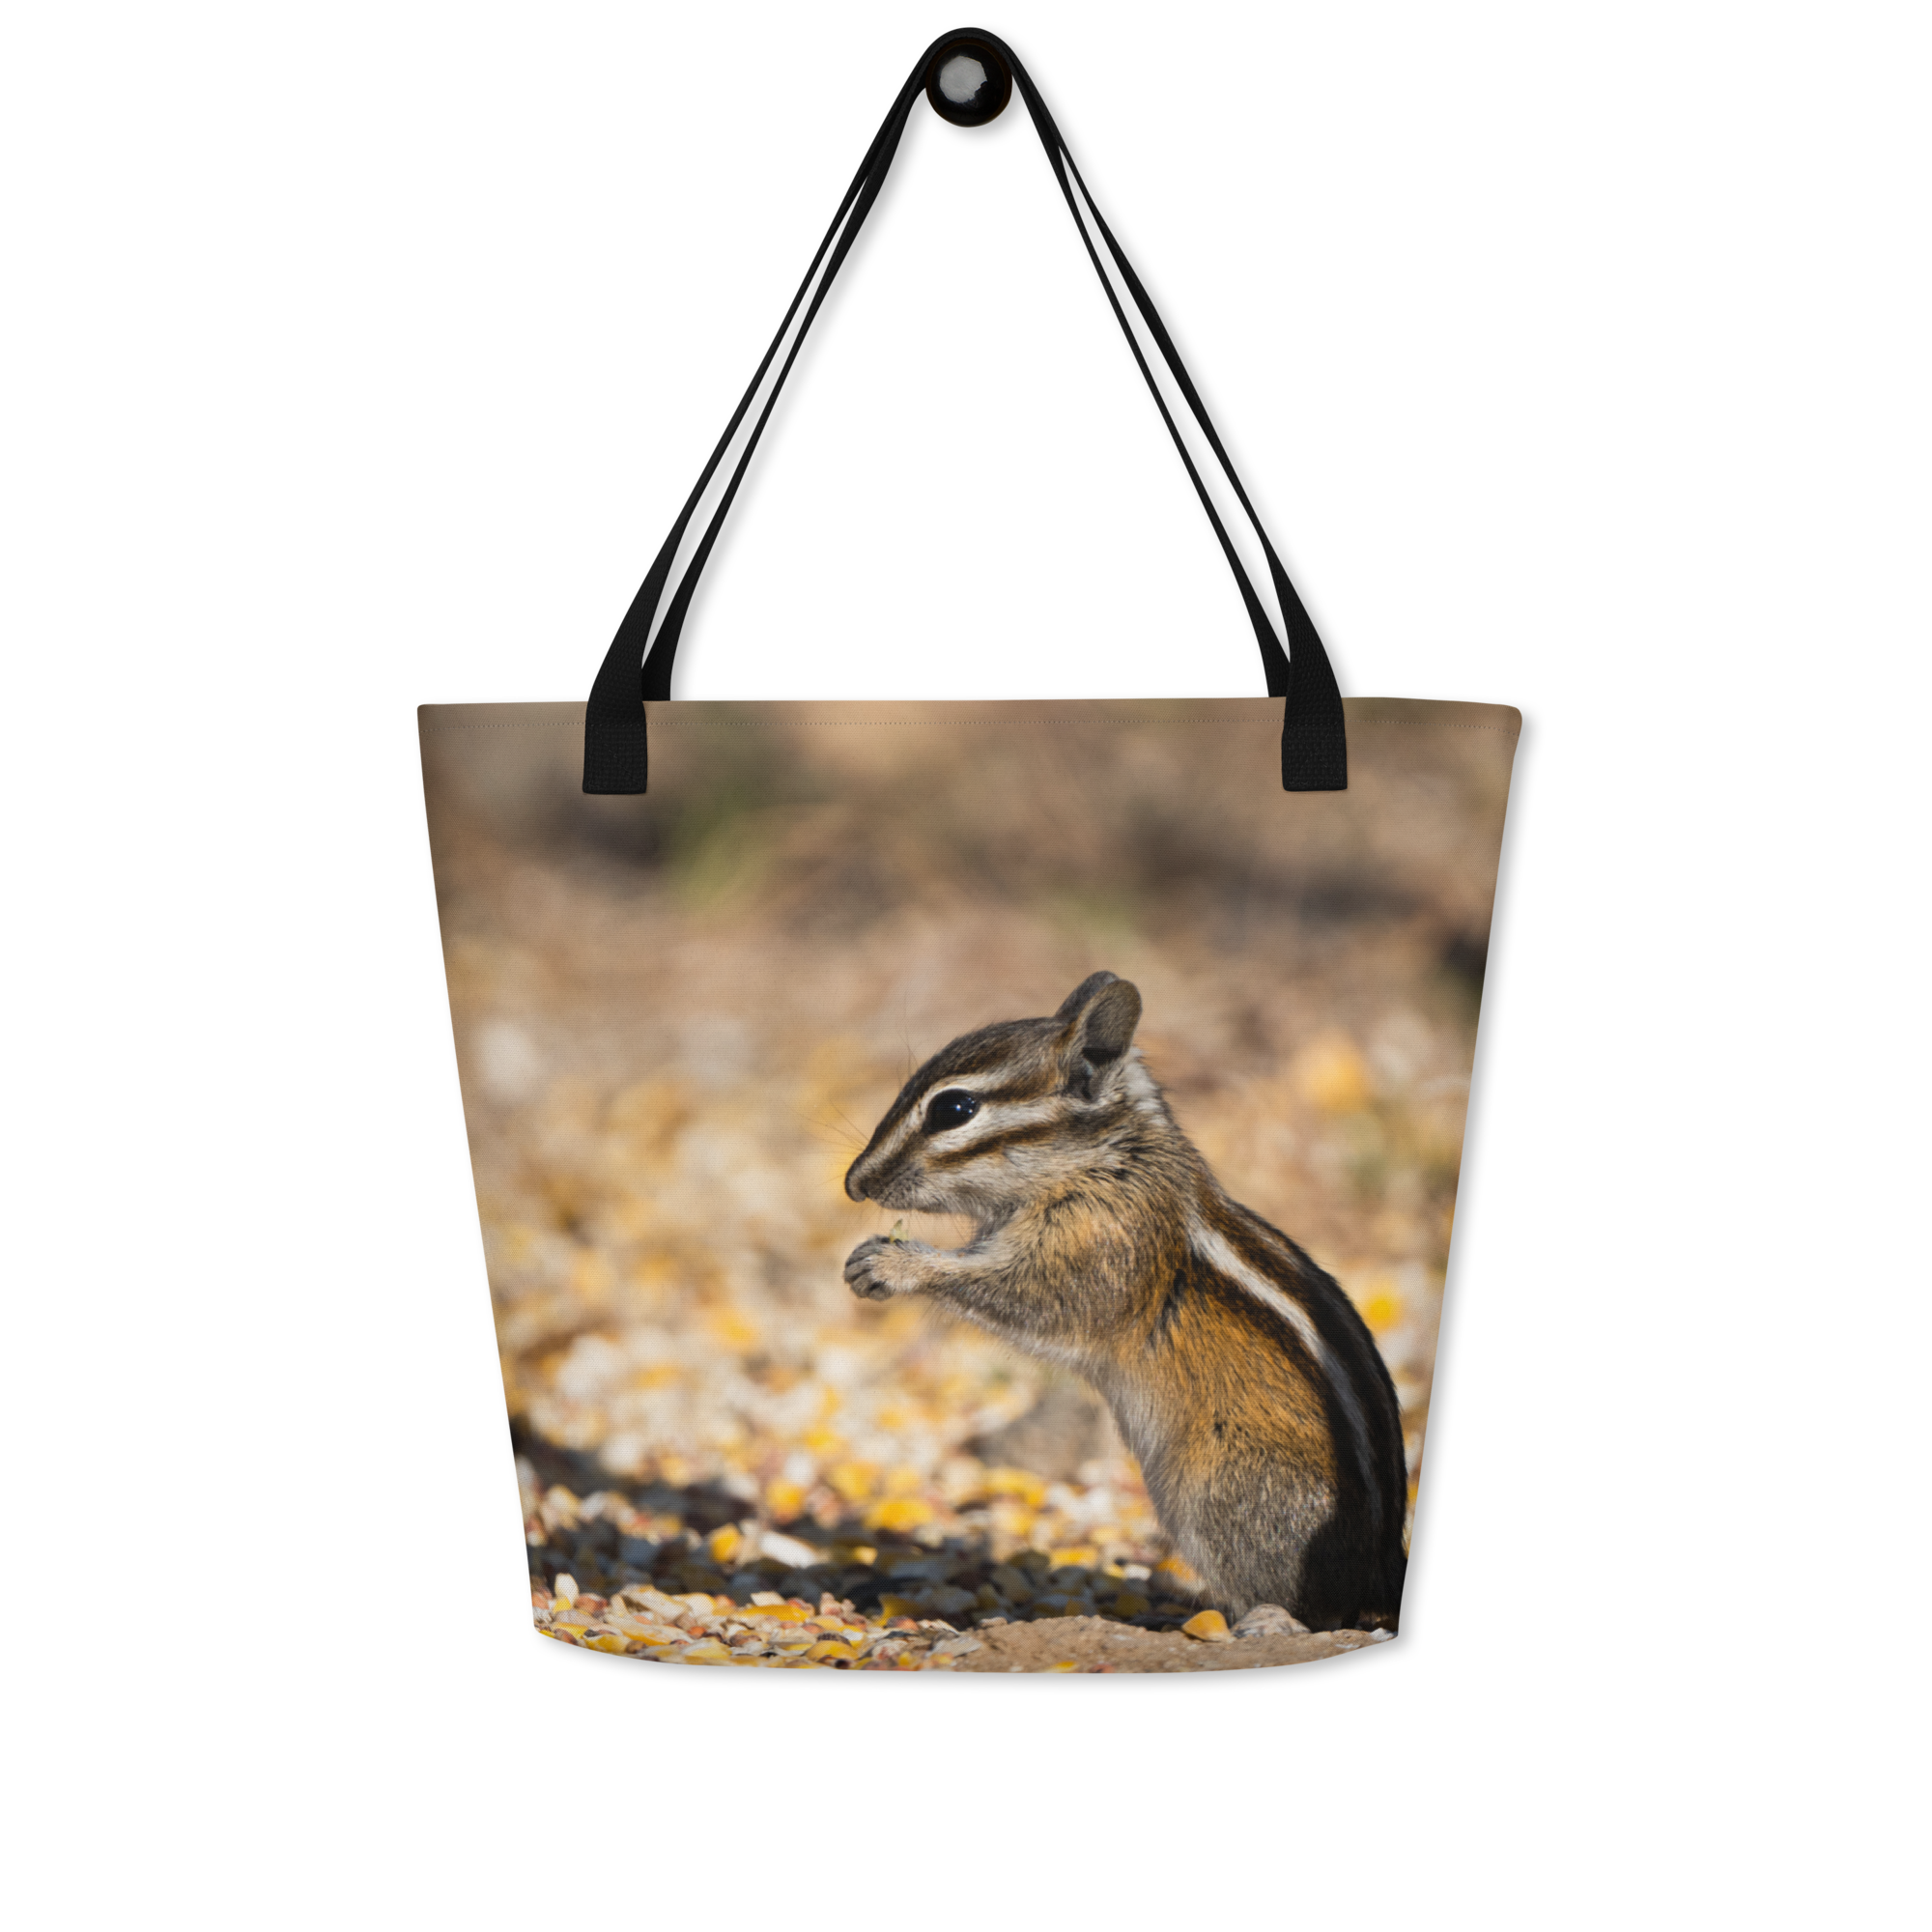 Chipmunk All-Over Print Large Tote Bag - The Overland Diaries